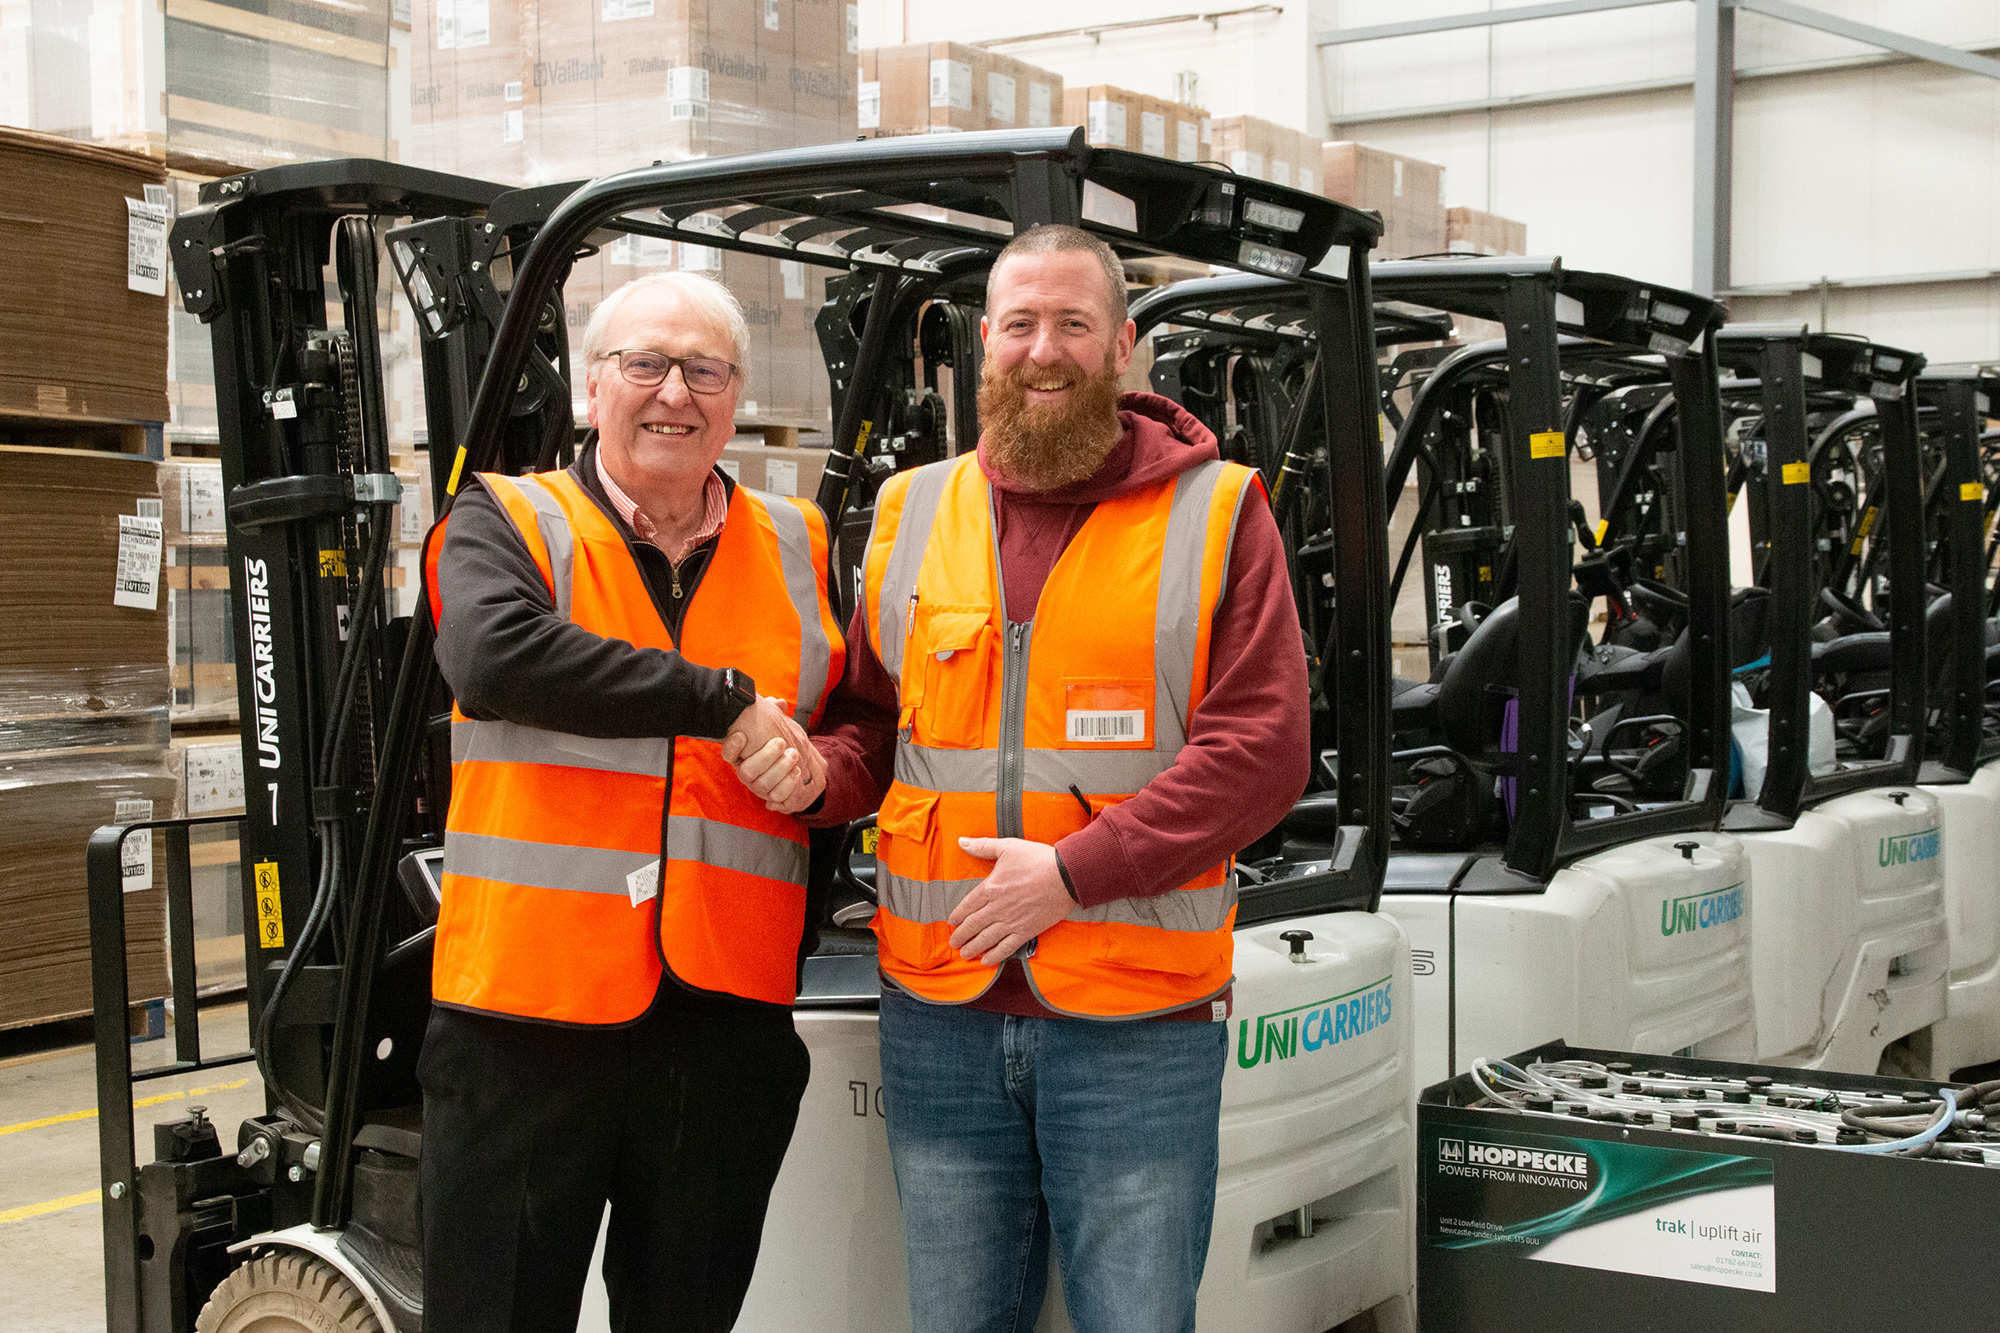 TechnoCargo enjoys £50,000 in annual    energy cost savings  - learn more